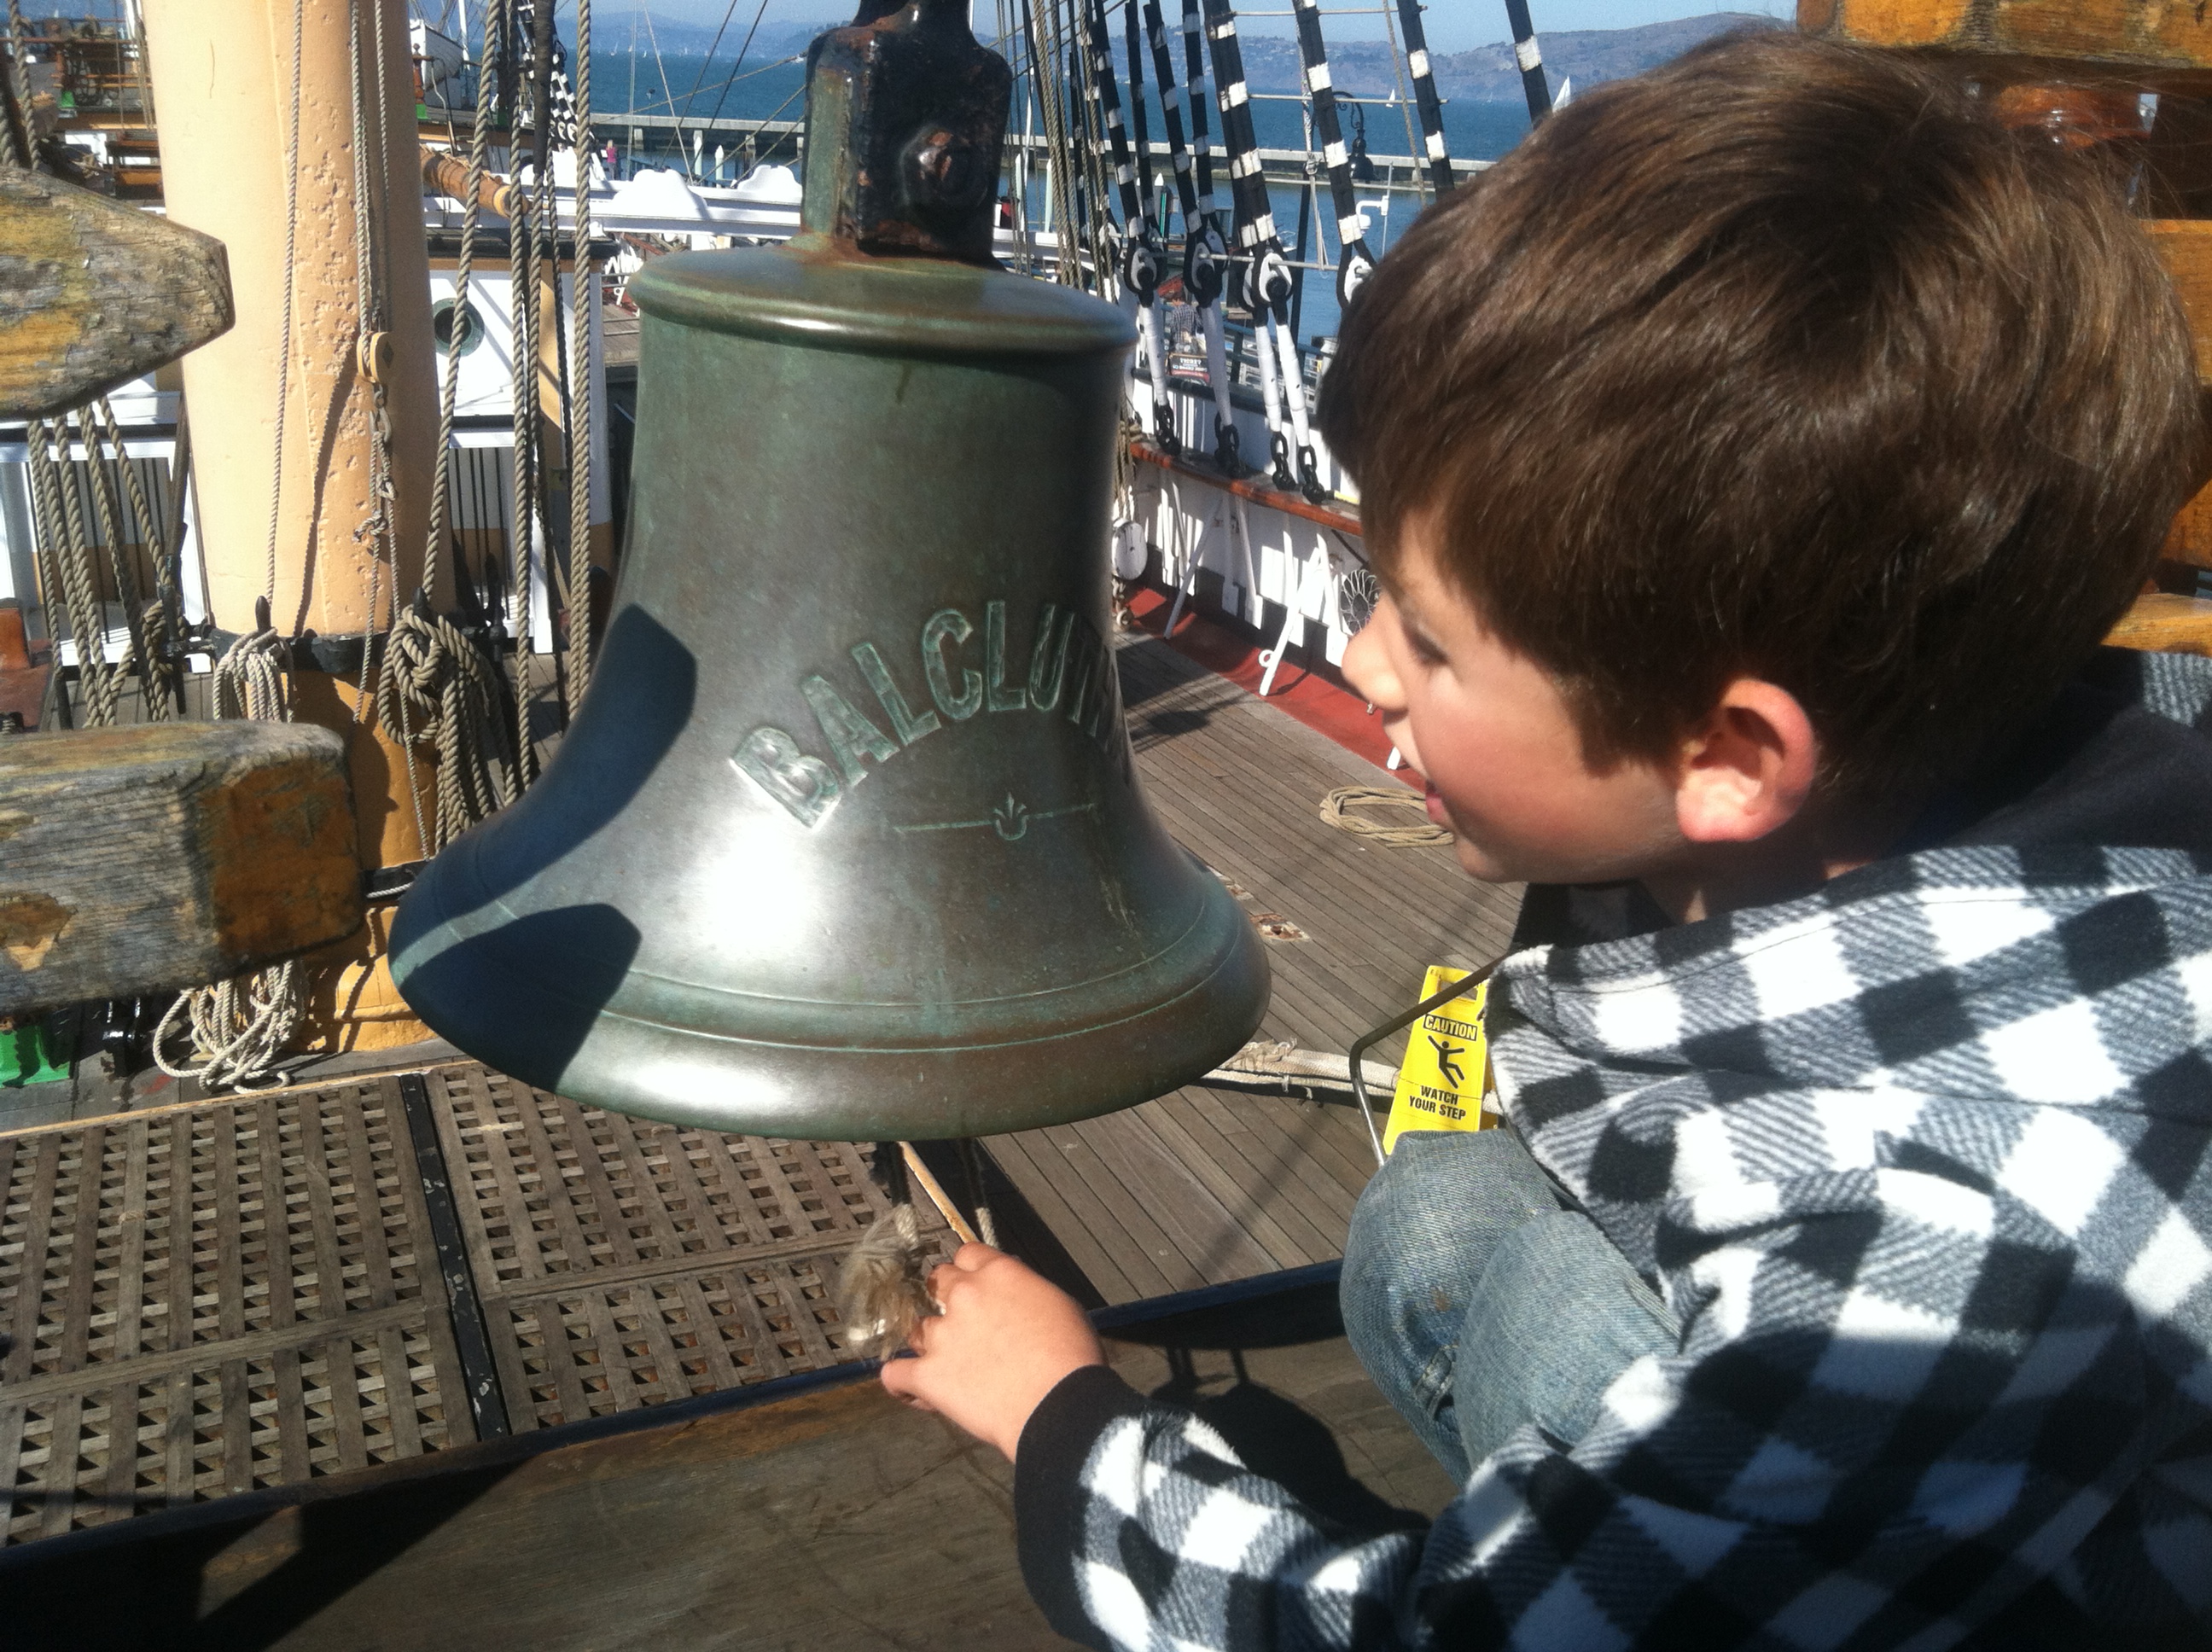 Young Gabe ringing the deck bell aboard the Balclutha, letting others know he is ready to set sail